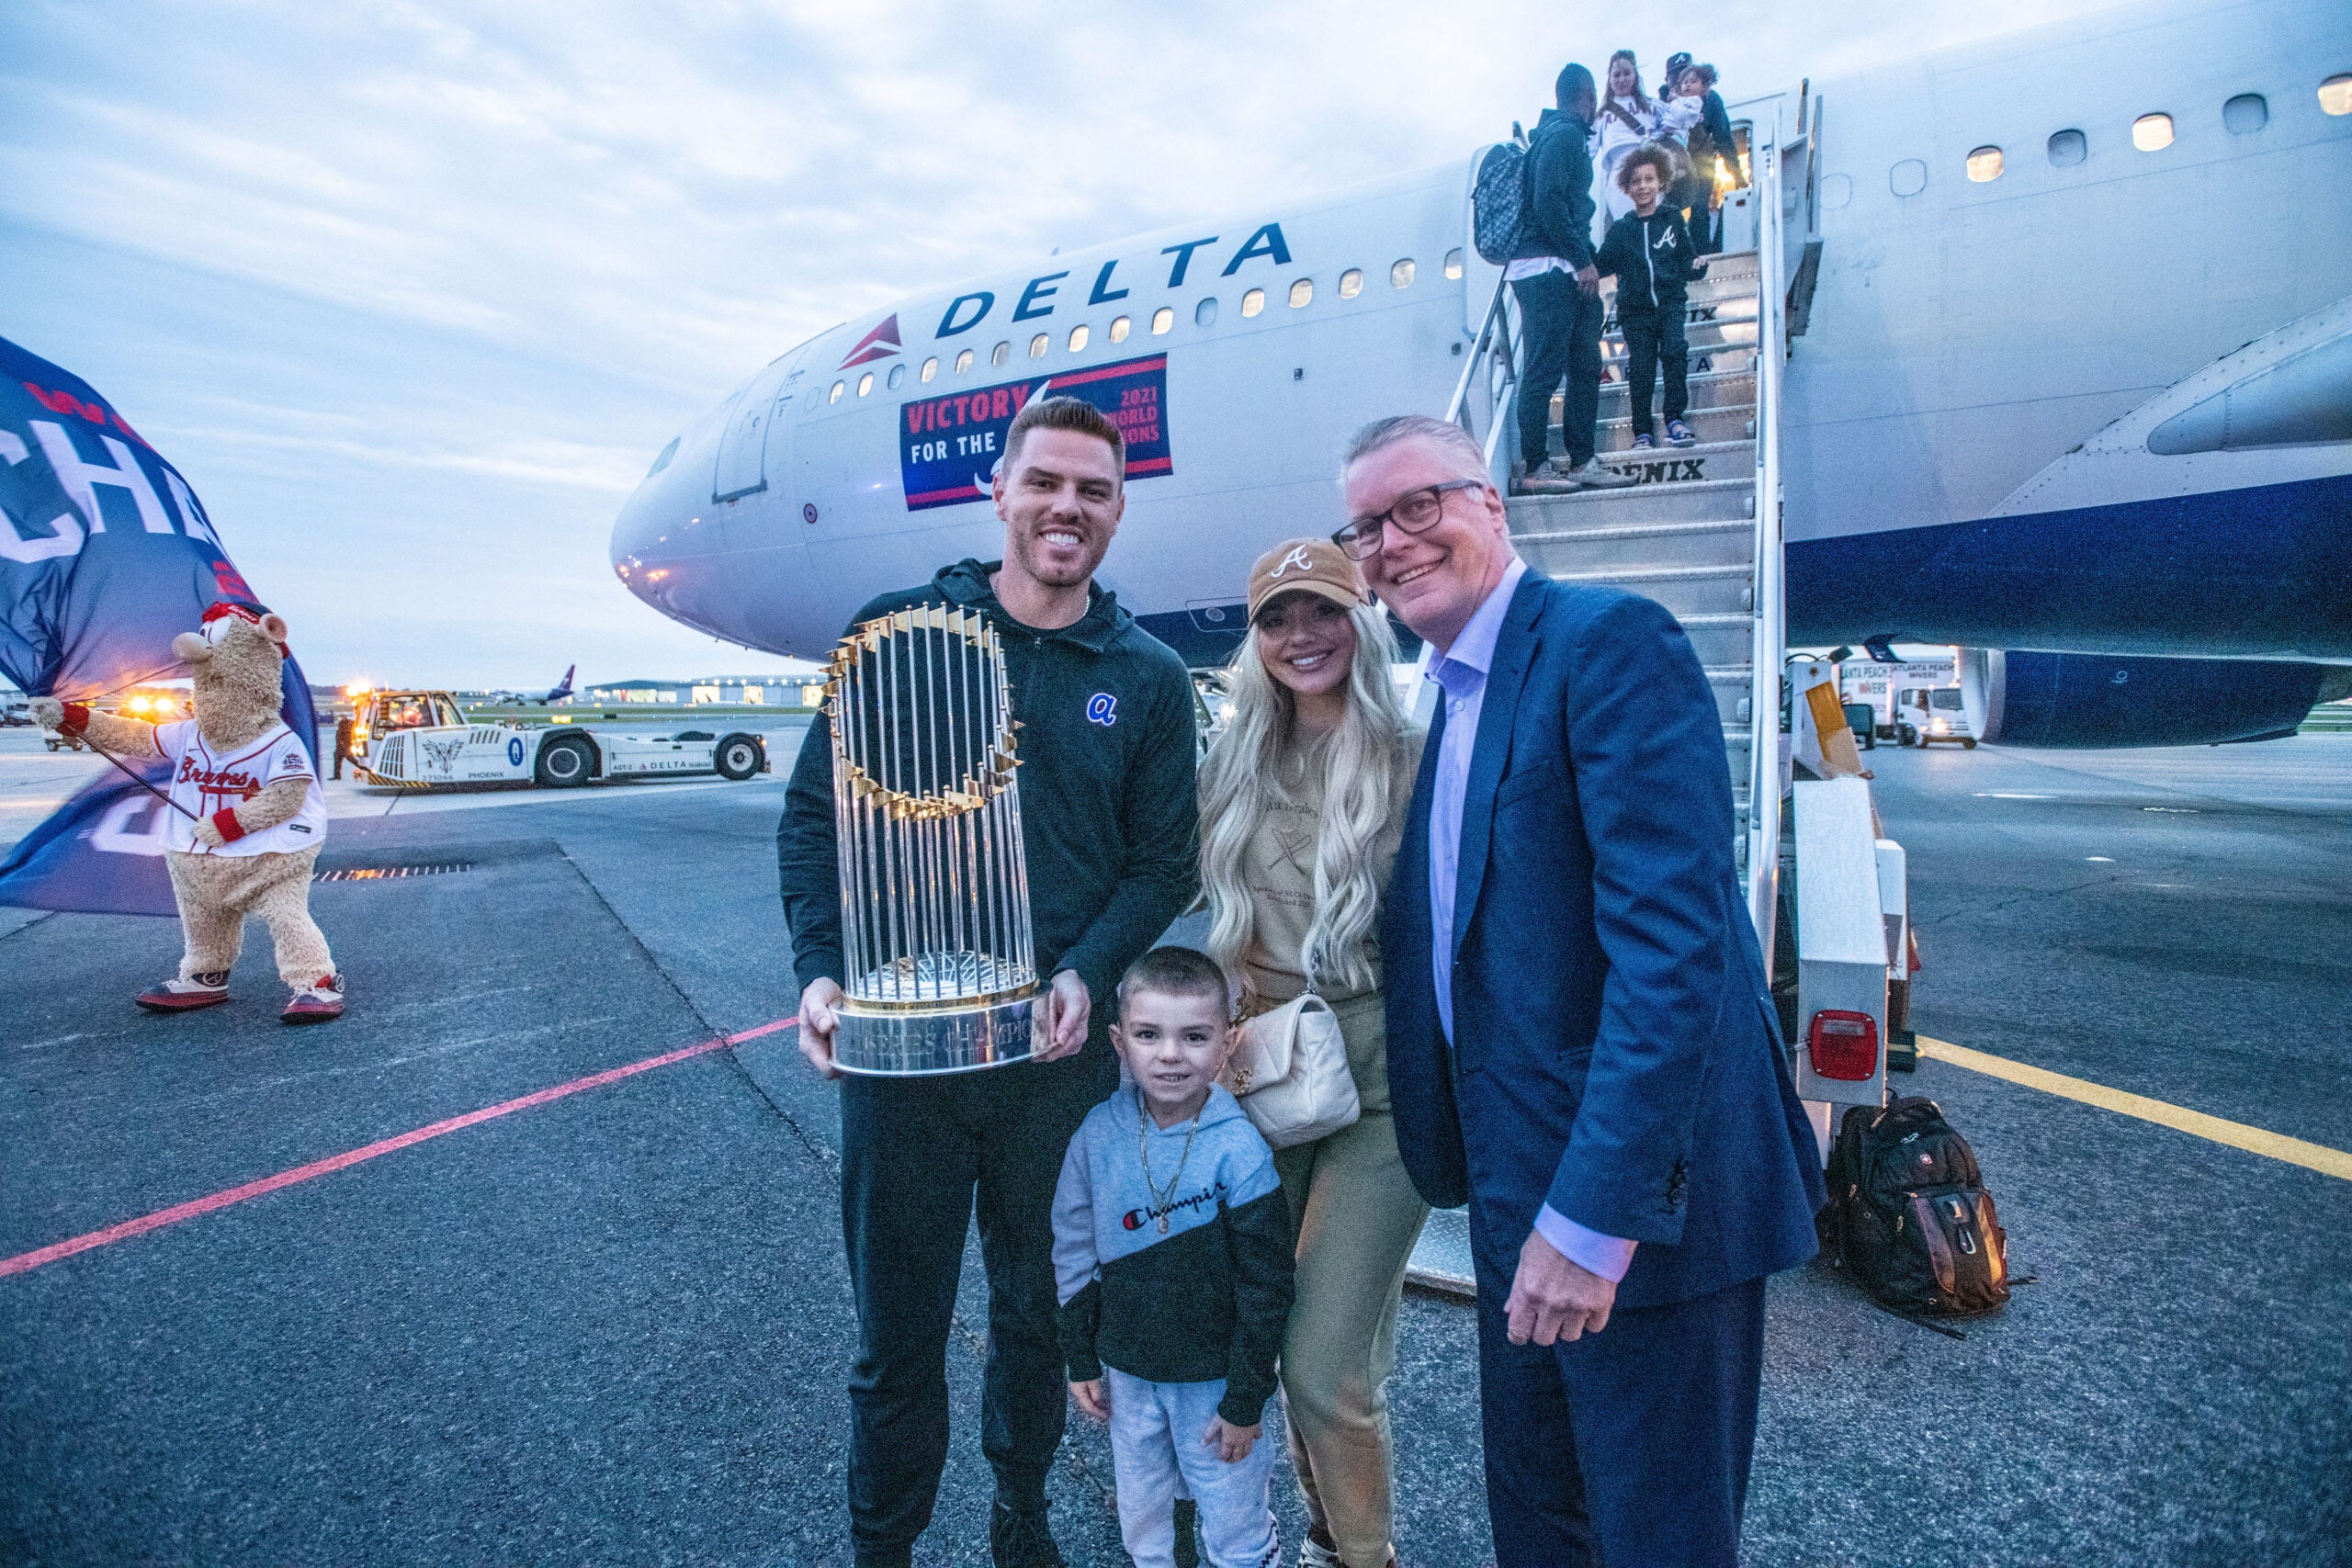 Atlanta Braves boost Delta's latest claim: 'The grand slam of carrying champions..